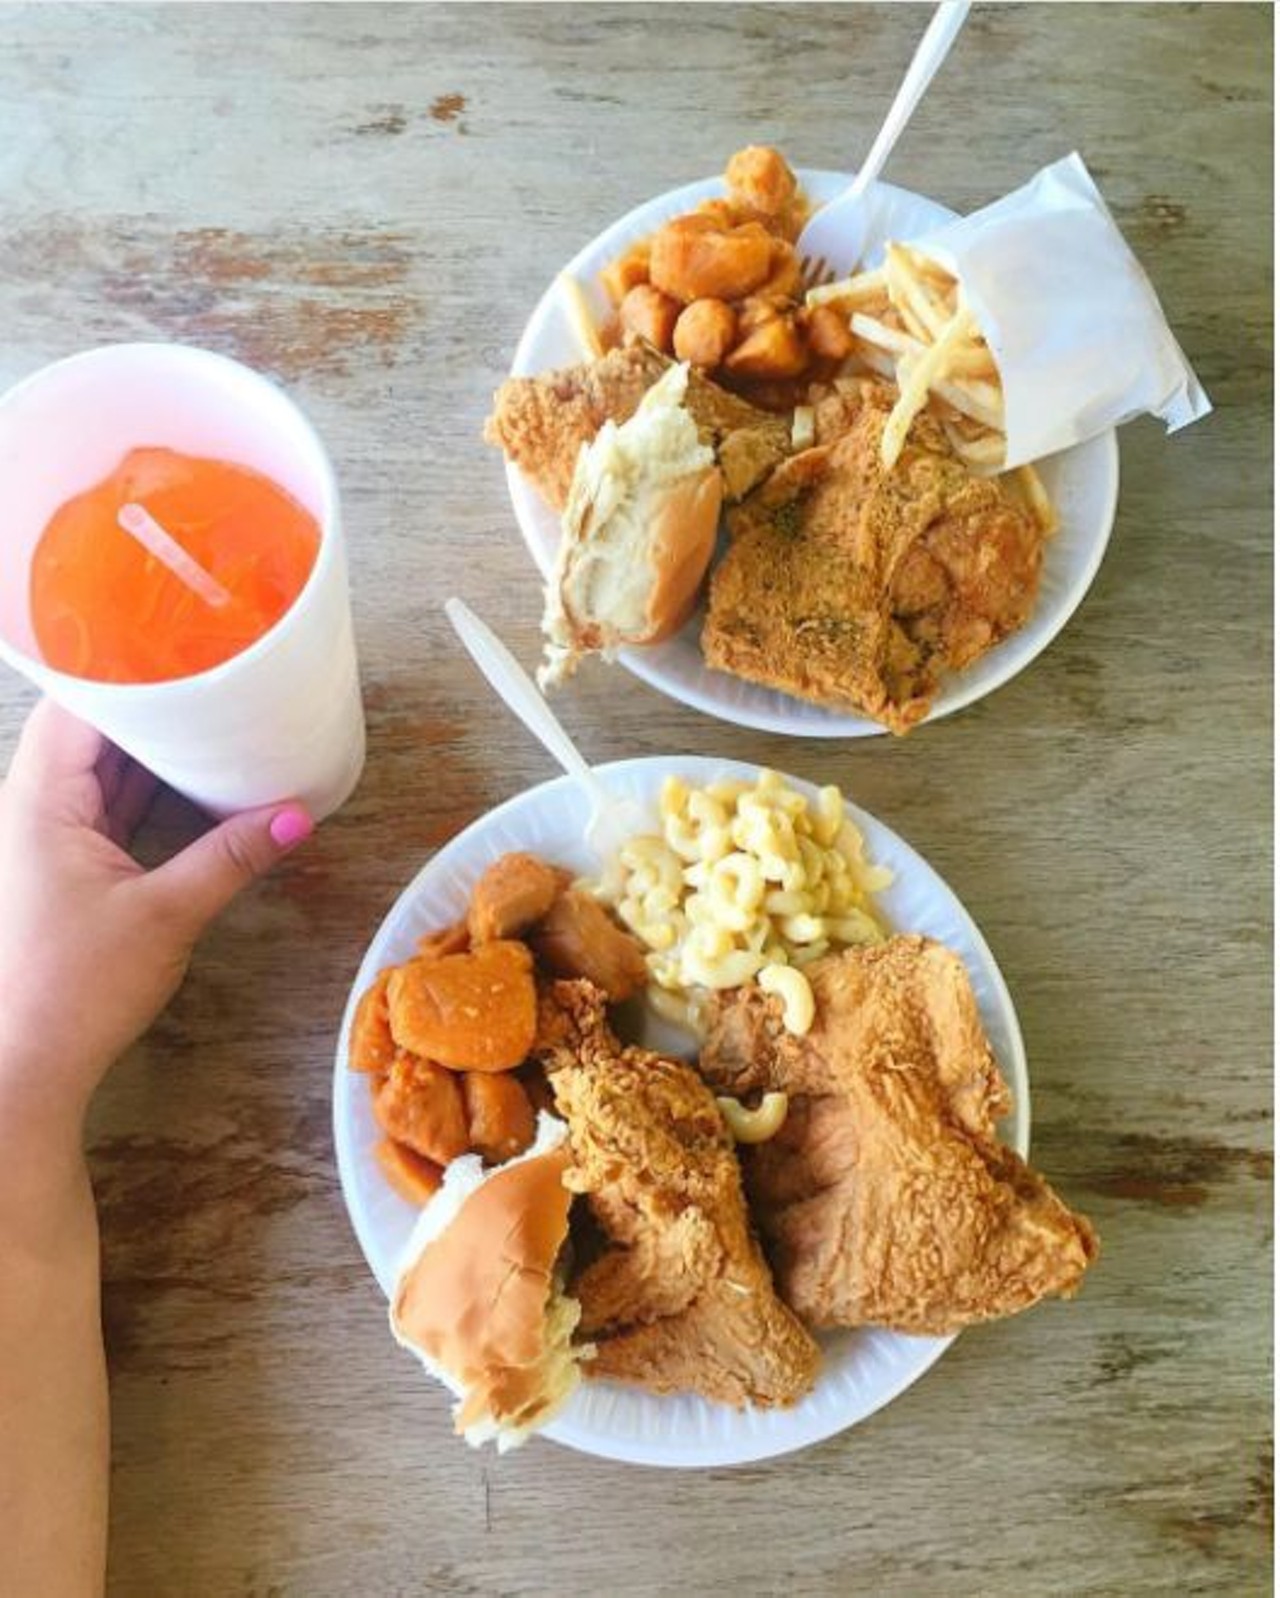 Fried Chicken from  Chatman&#146;s Chicken
1747 S WW White Road, (210) 359-0245
Cheap and delicious. Don&#146;t skip the corn fritters. 
Photo via Instagram, everydayiscaturday